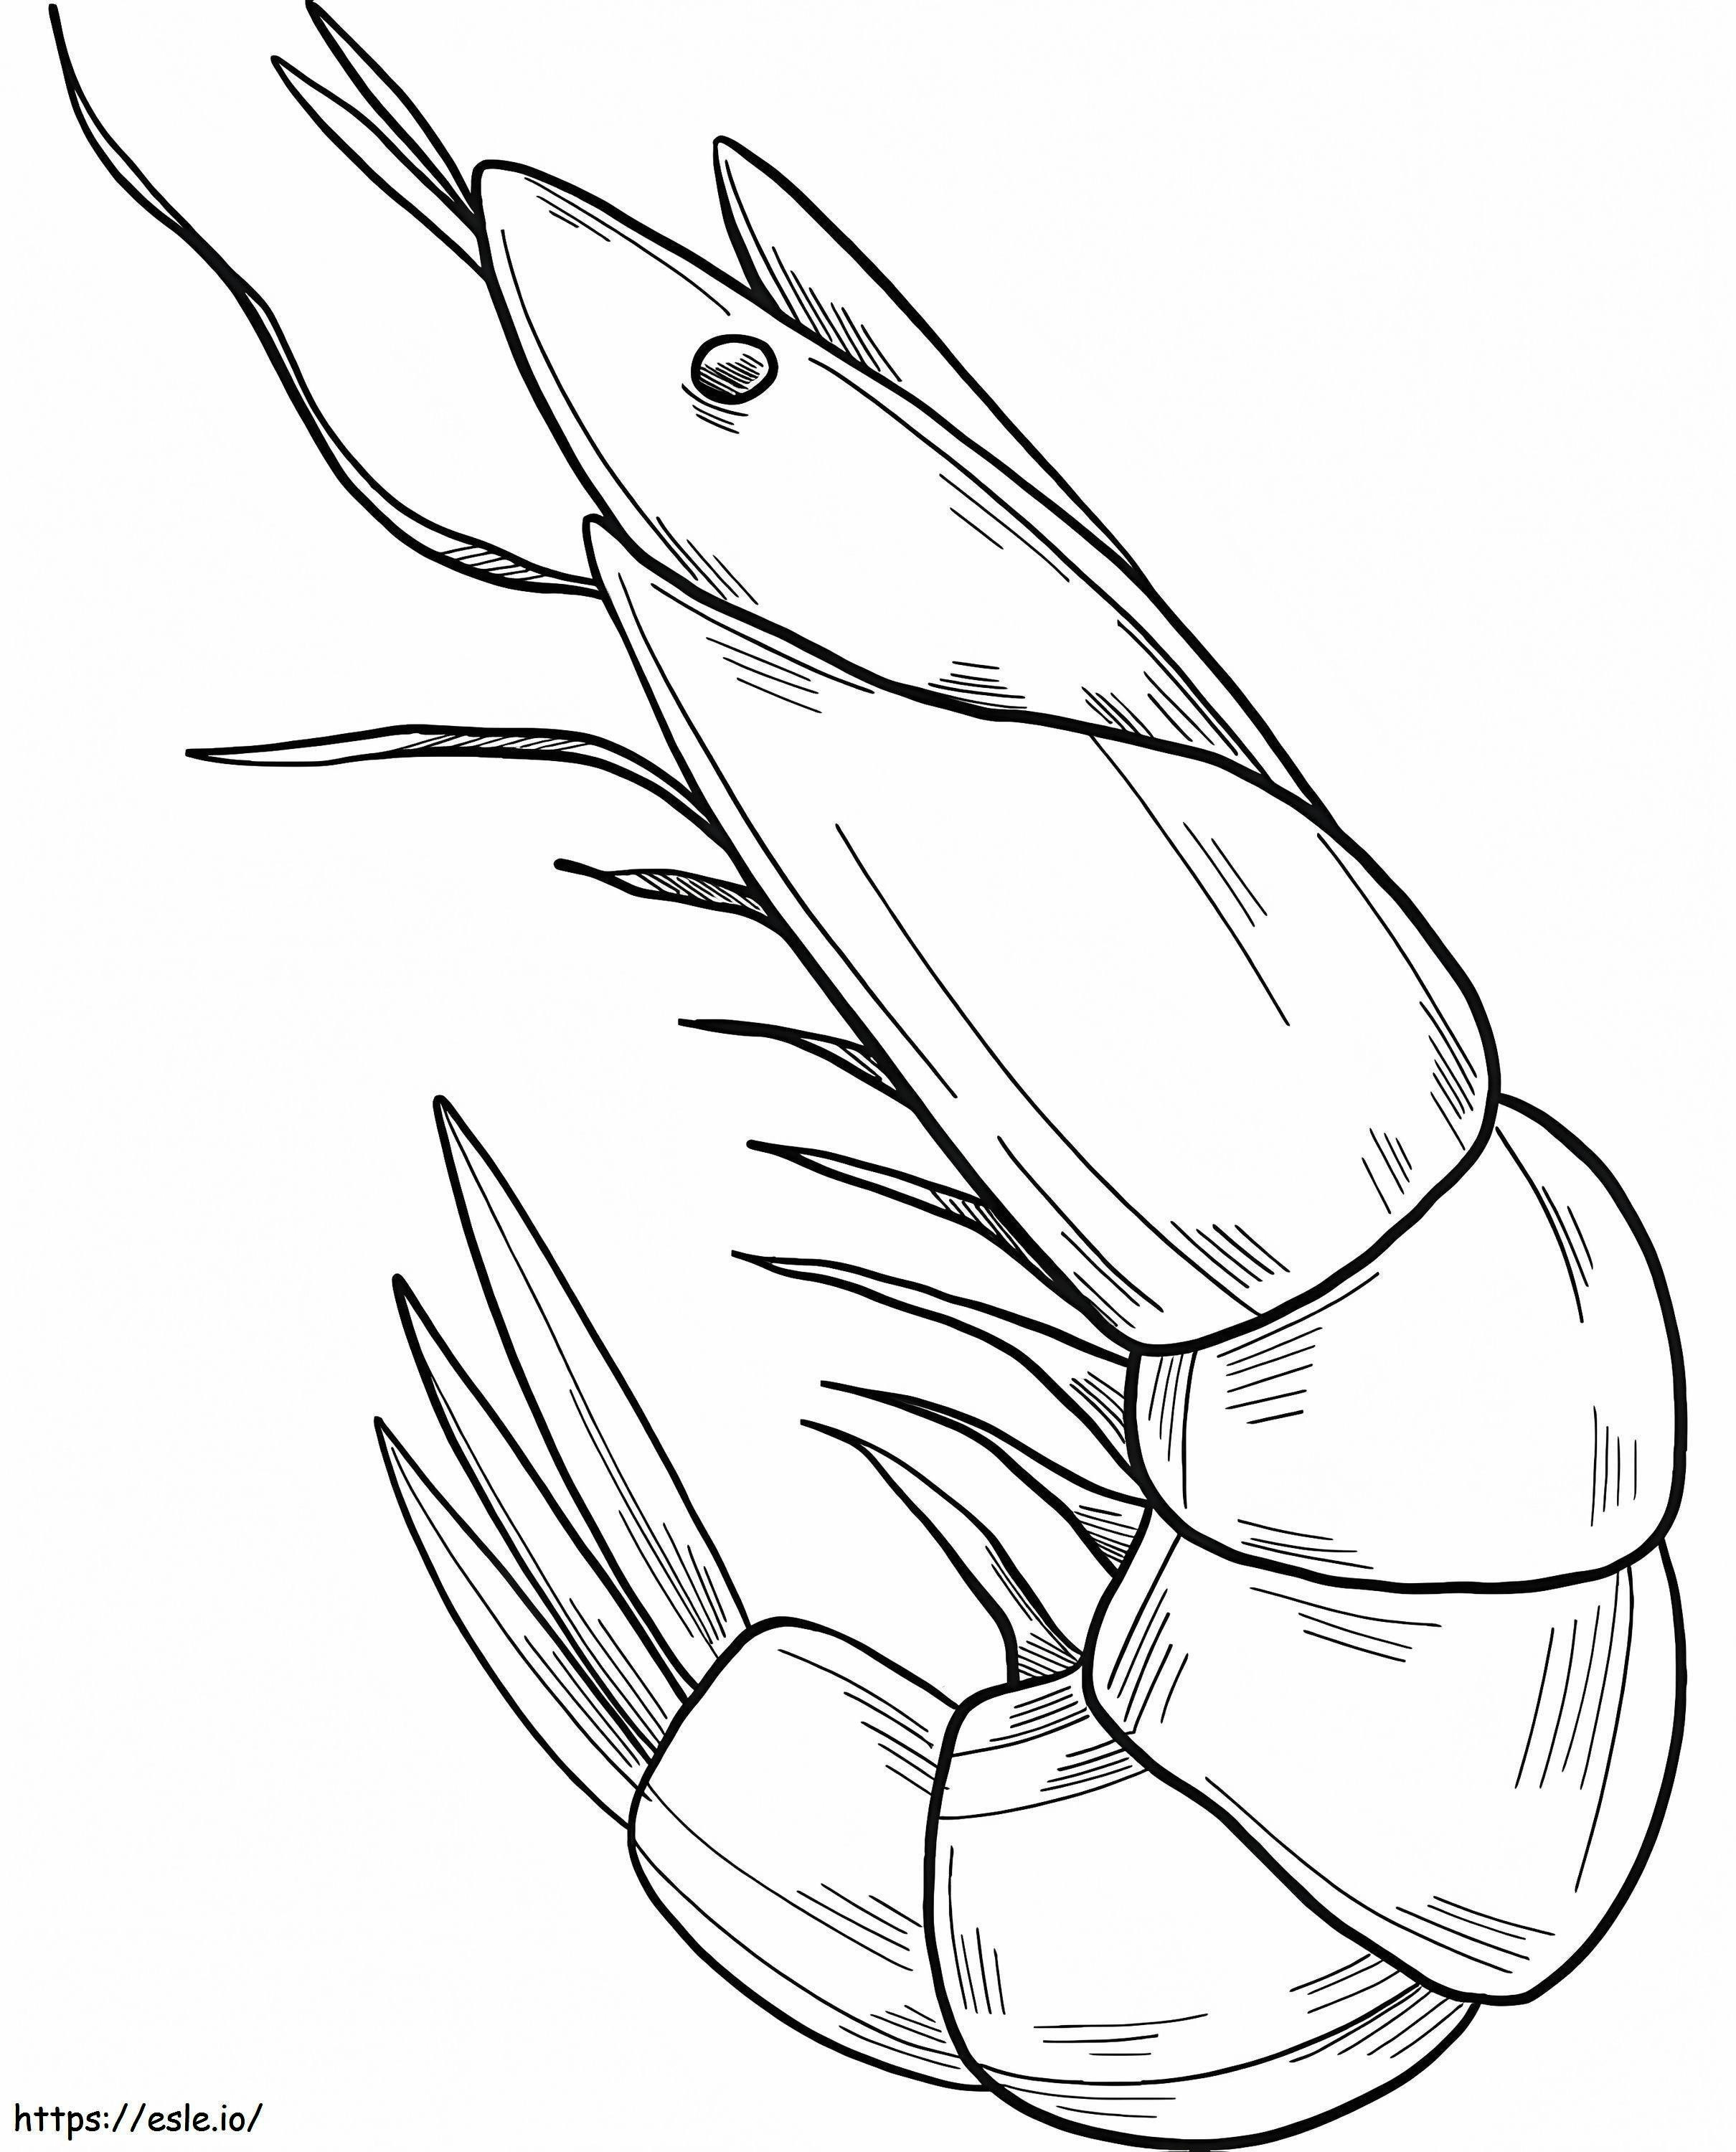 Normal Shrimp coloring page